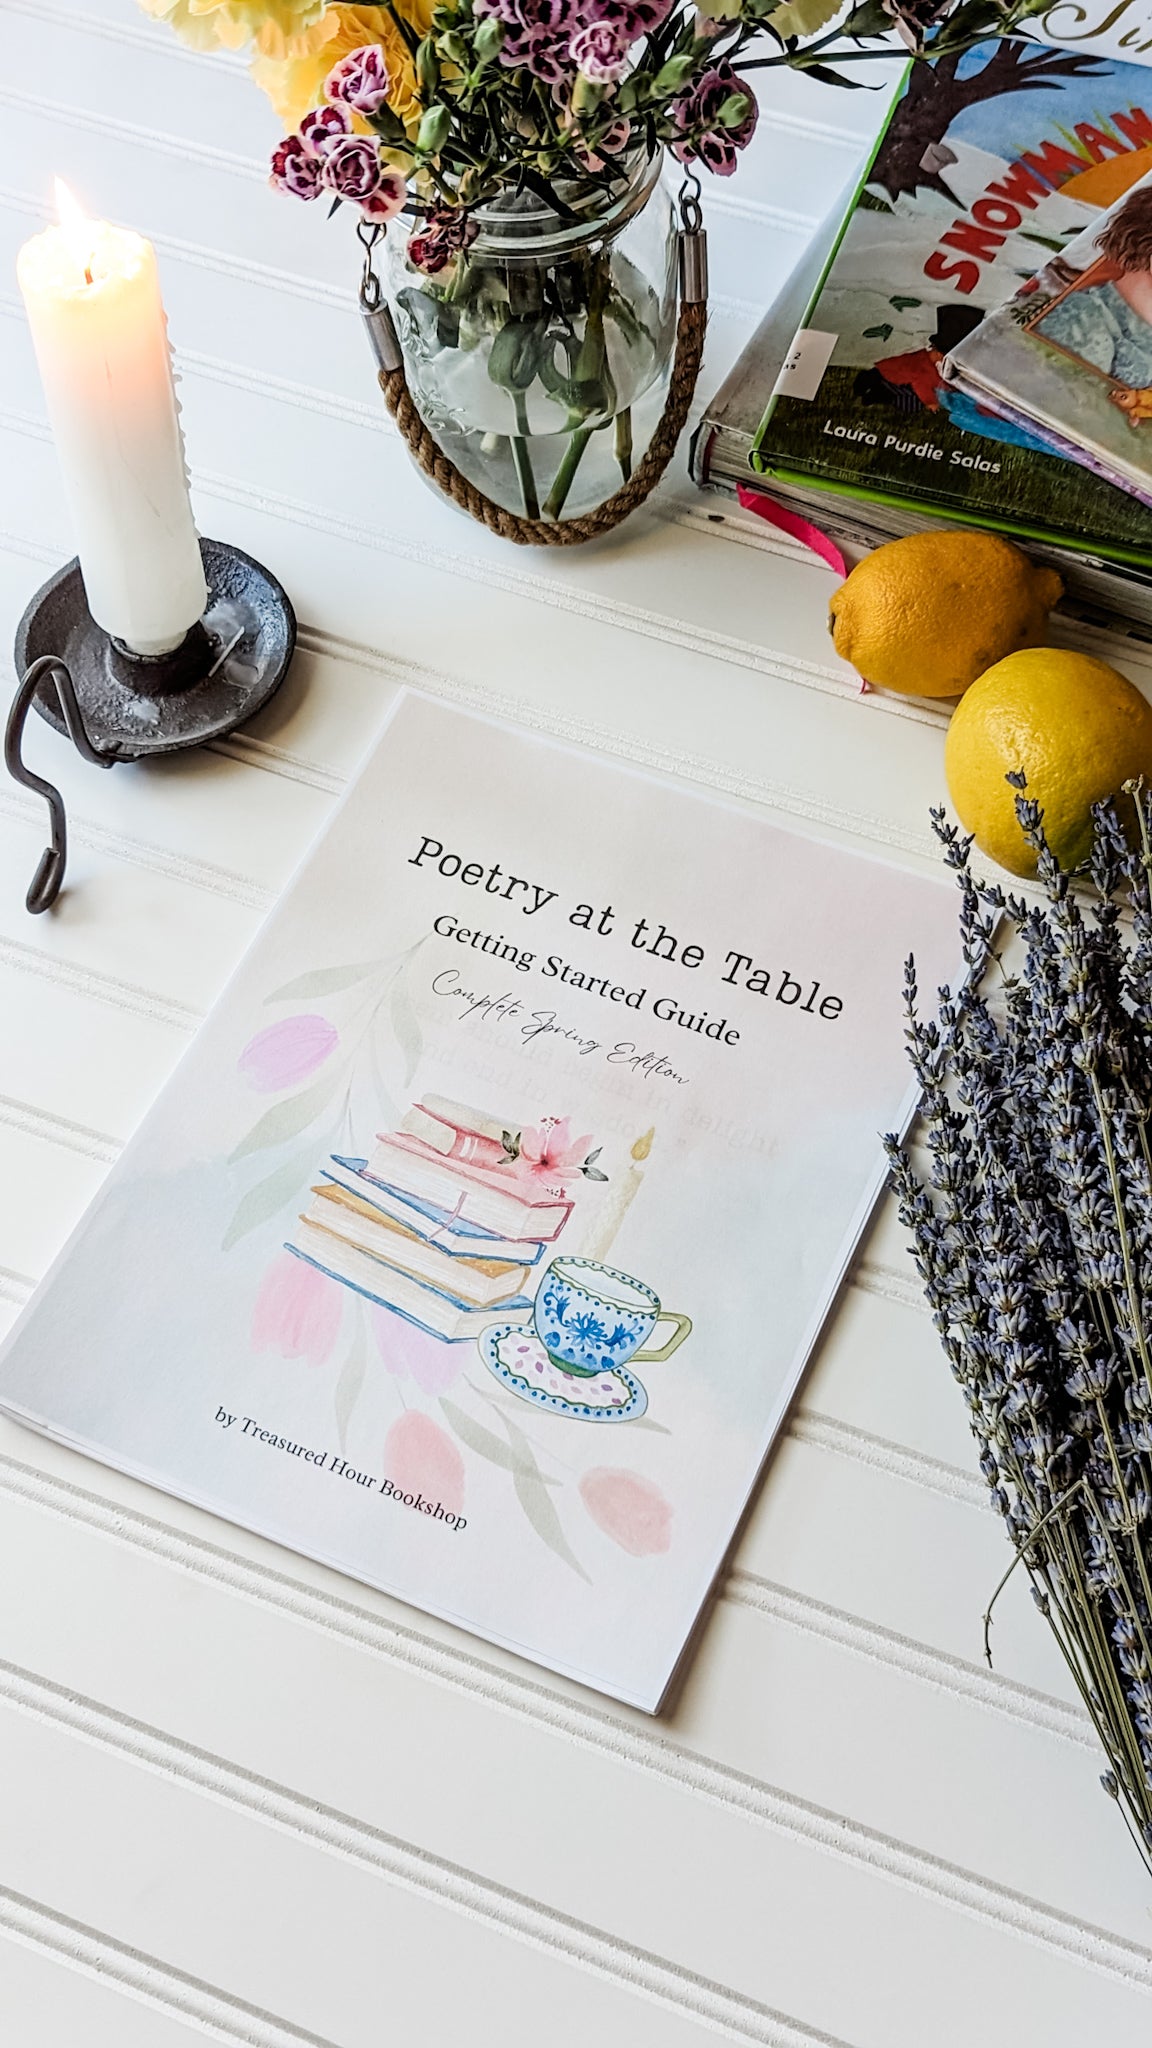 [Spring COMPLETE GUIDE] Poetry at the Table: Getting Started Guide